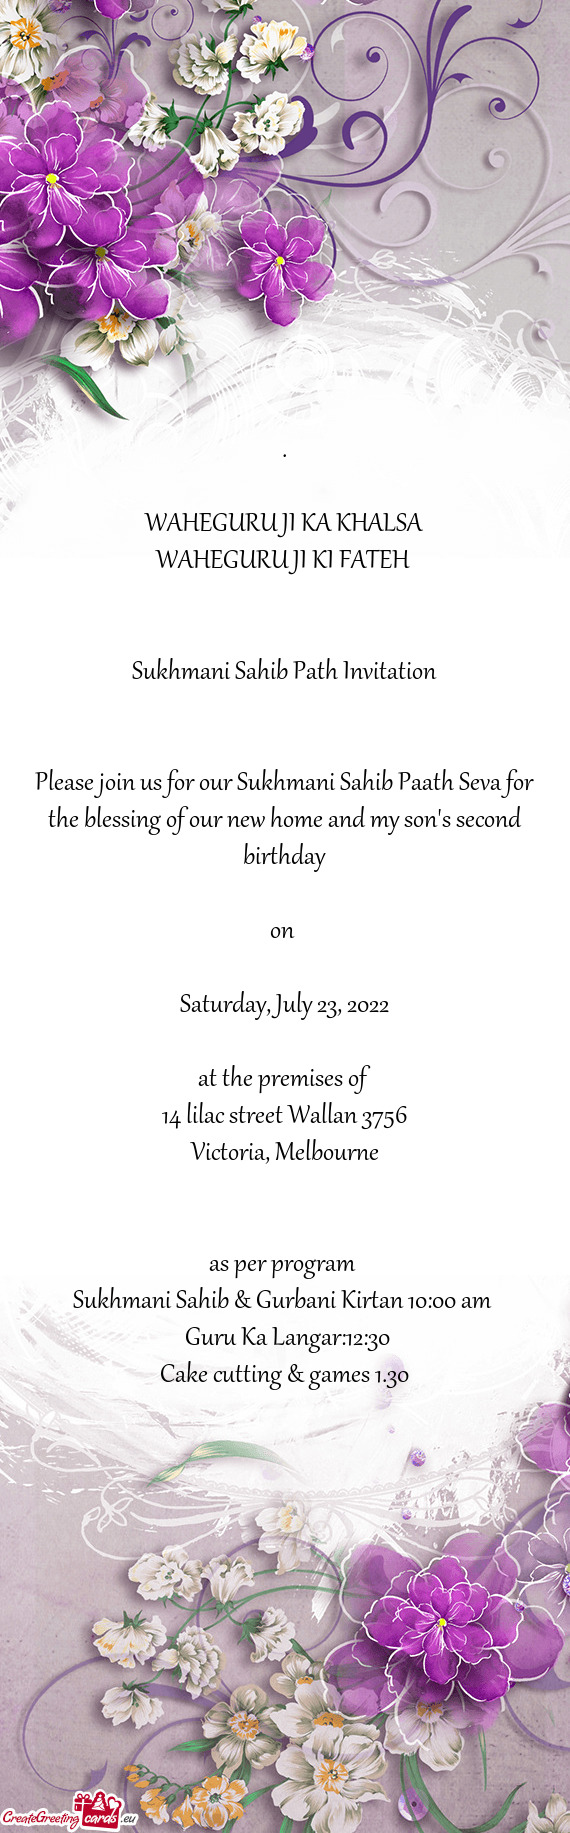 Please join us for our Sukhmani Sahib Paath Seva for the blessing of our new home and my son